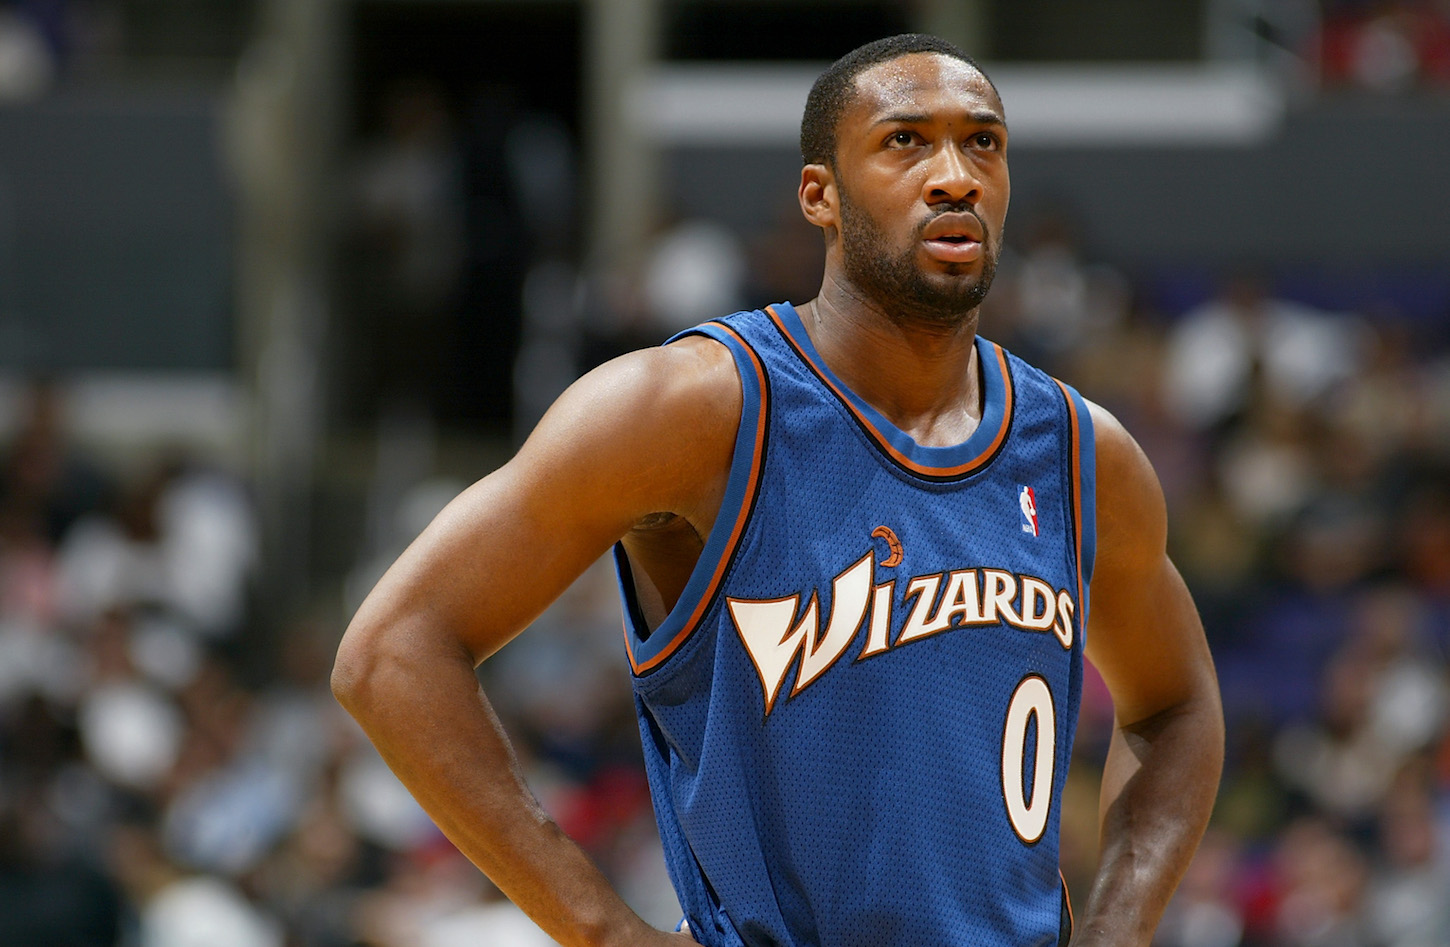 Gilbert Arenas #0 of the Washington Wizards stands on the court during the game against the Los Angeles Clippers at Staples Center on March 25, 2004 in Los Angeles, California.